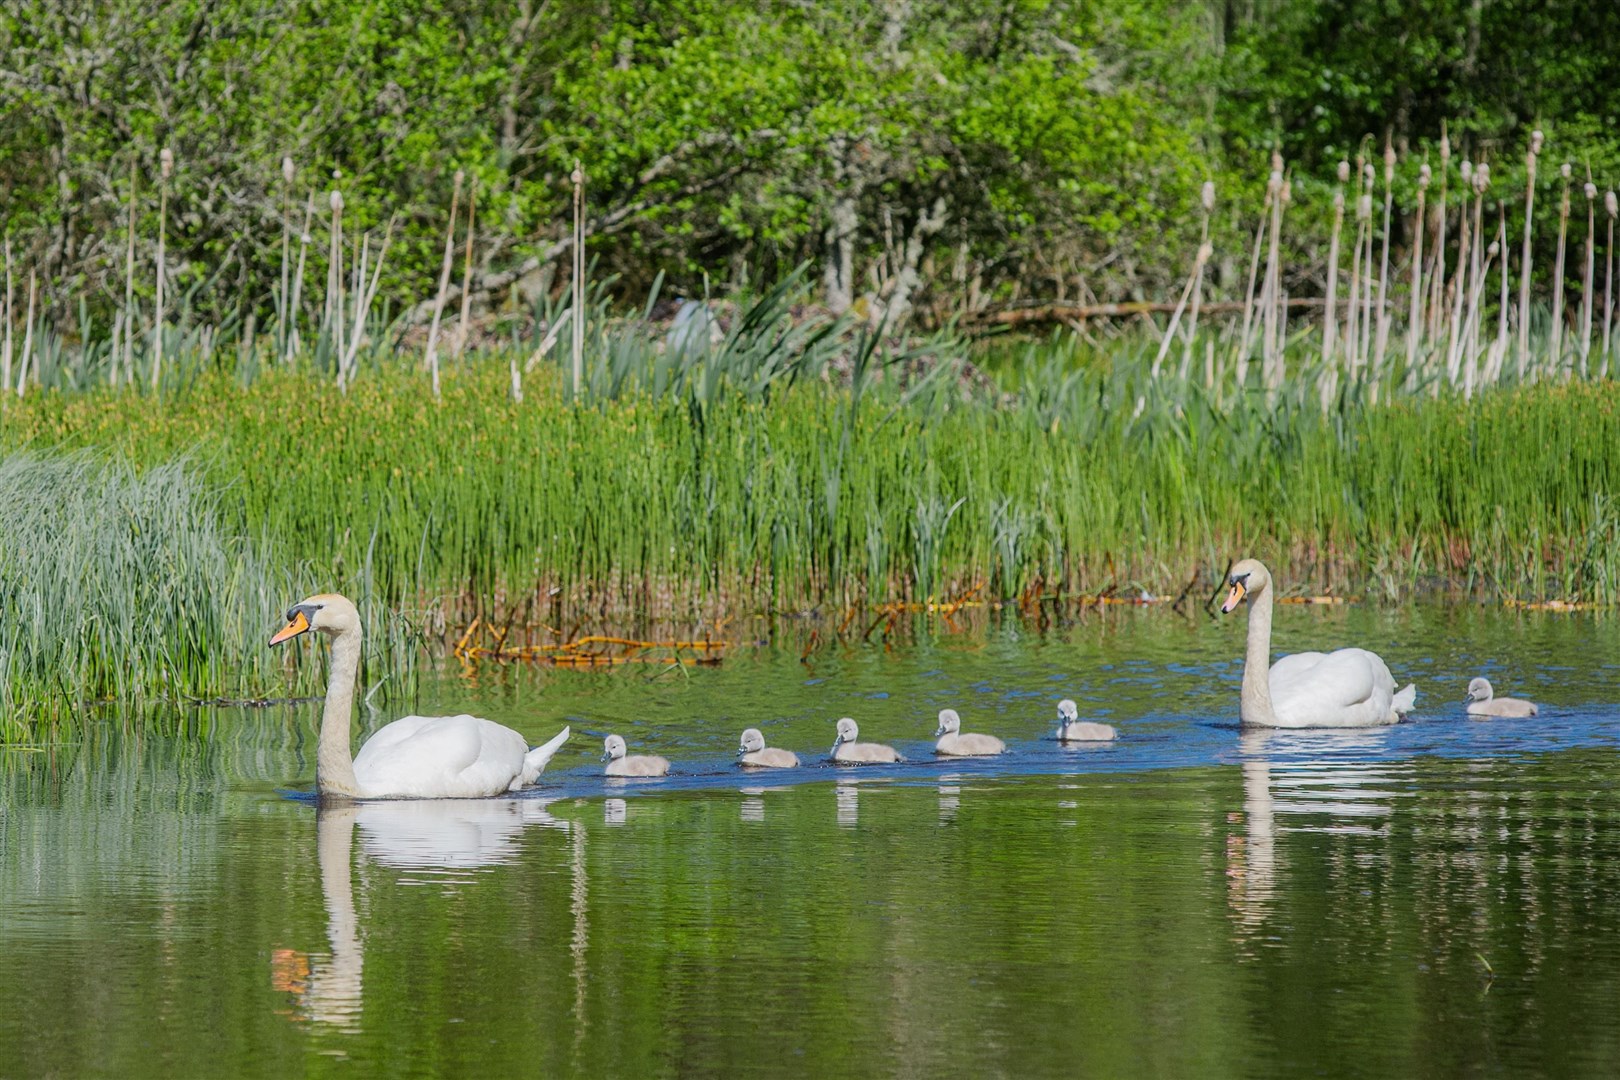 A family of swans with six cygnets swim in the loch at Sandquhar, Forres...Picture: Daniel Forsyth..